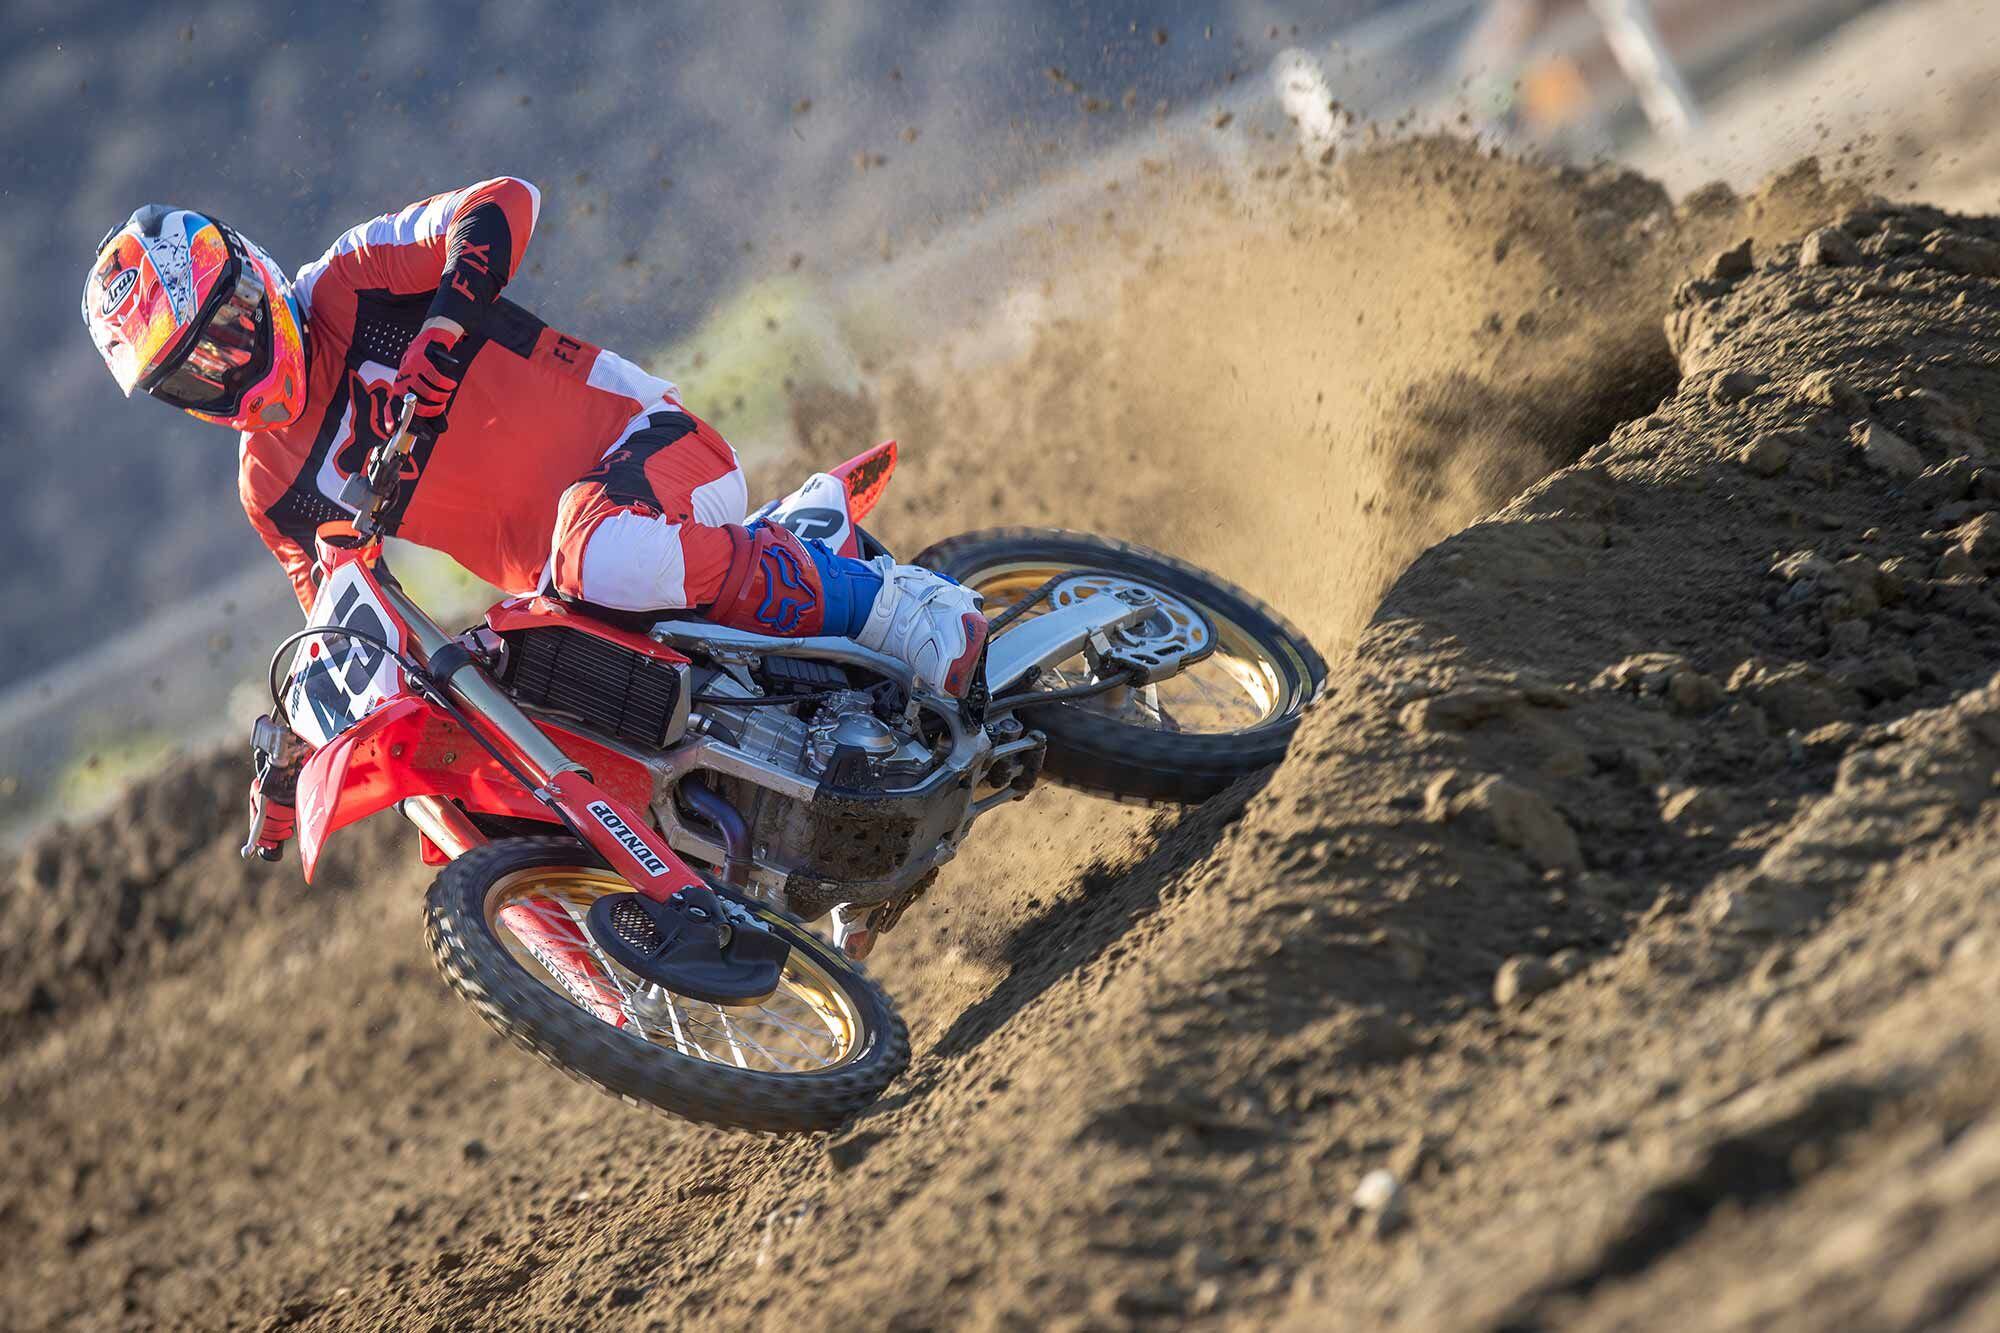 “Although the engine has good midrange power, when I try to take corners in third gear on the CRF450R, it doesn’t have enough bottom-end punch to pull it.” <i>—Cody Johnston</i>